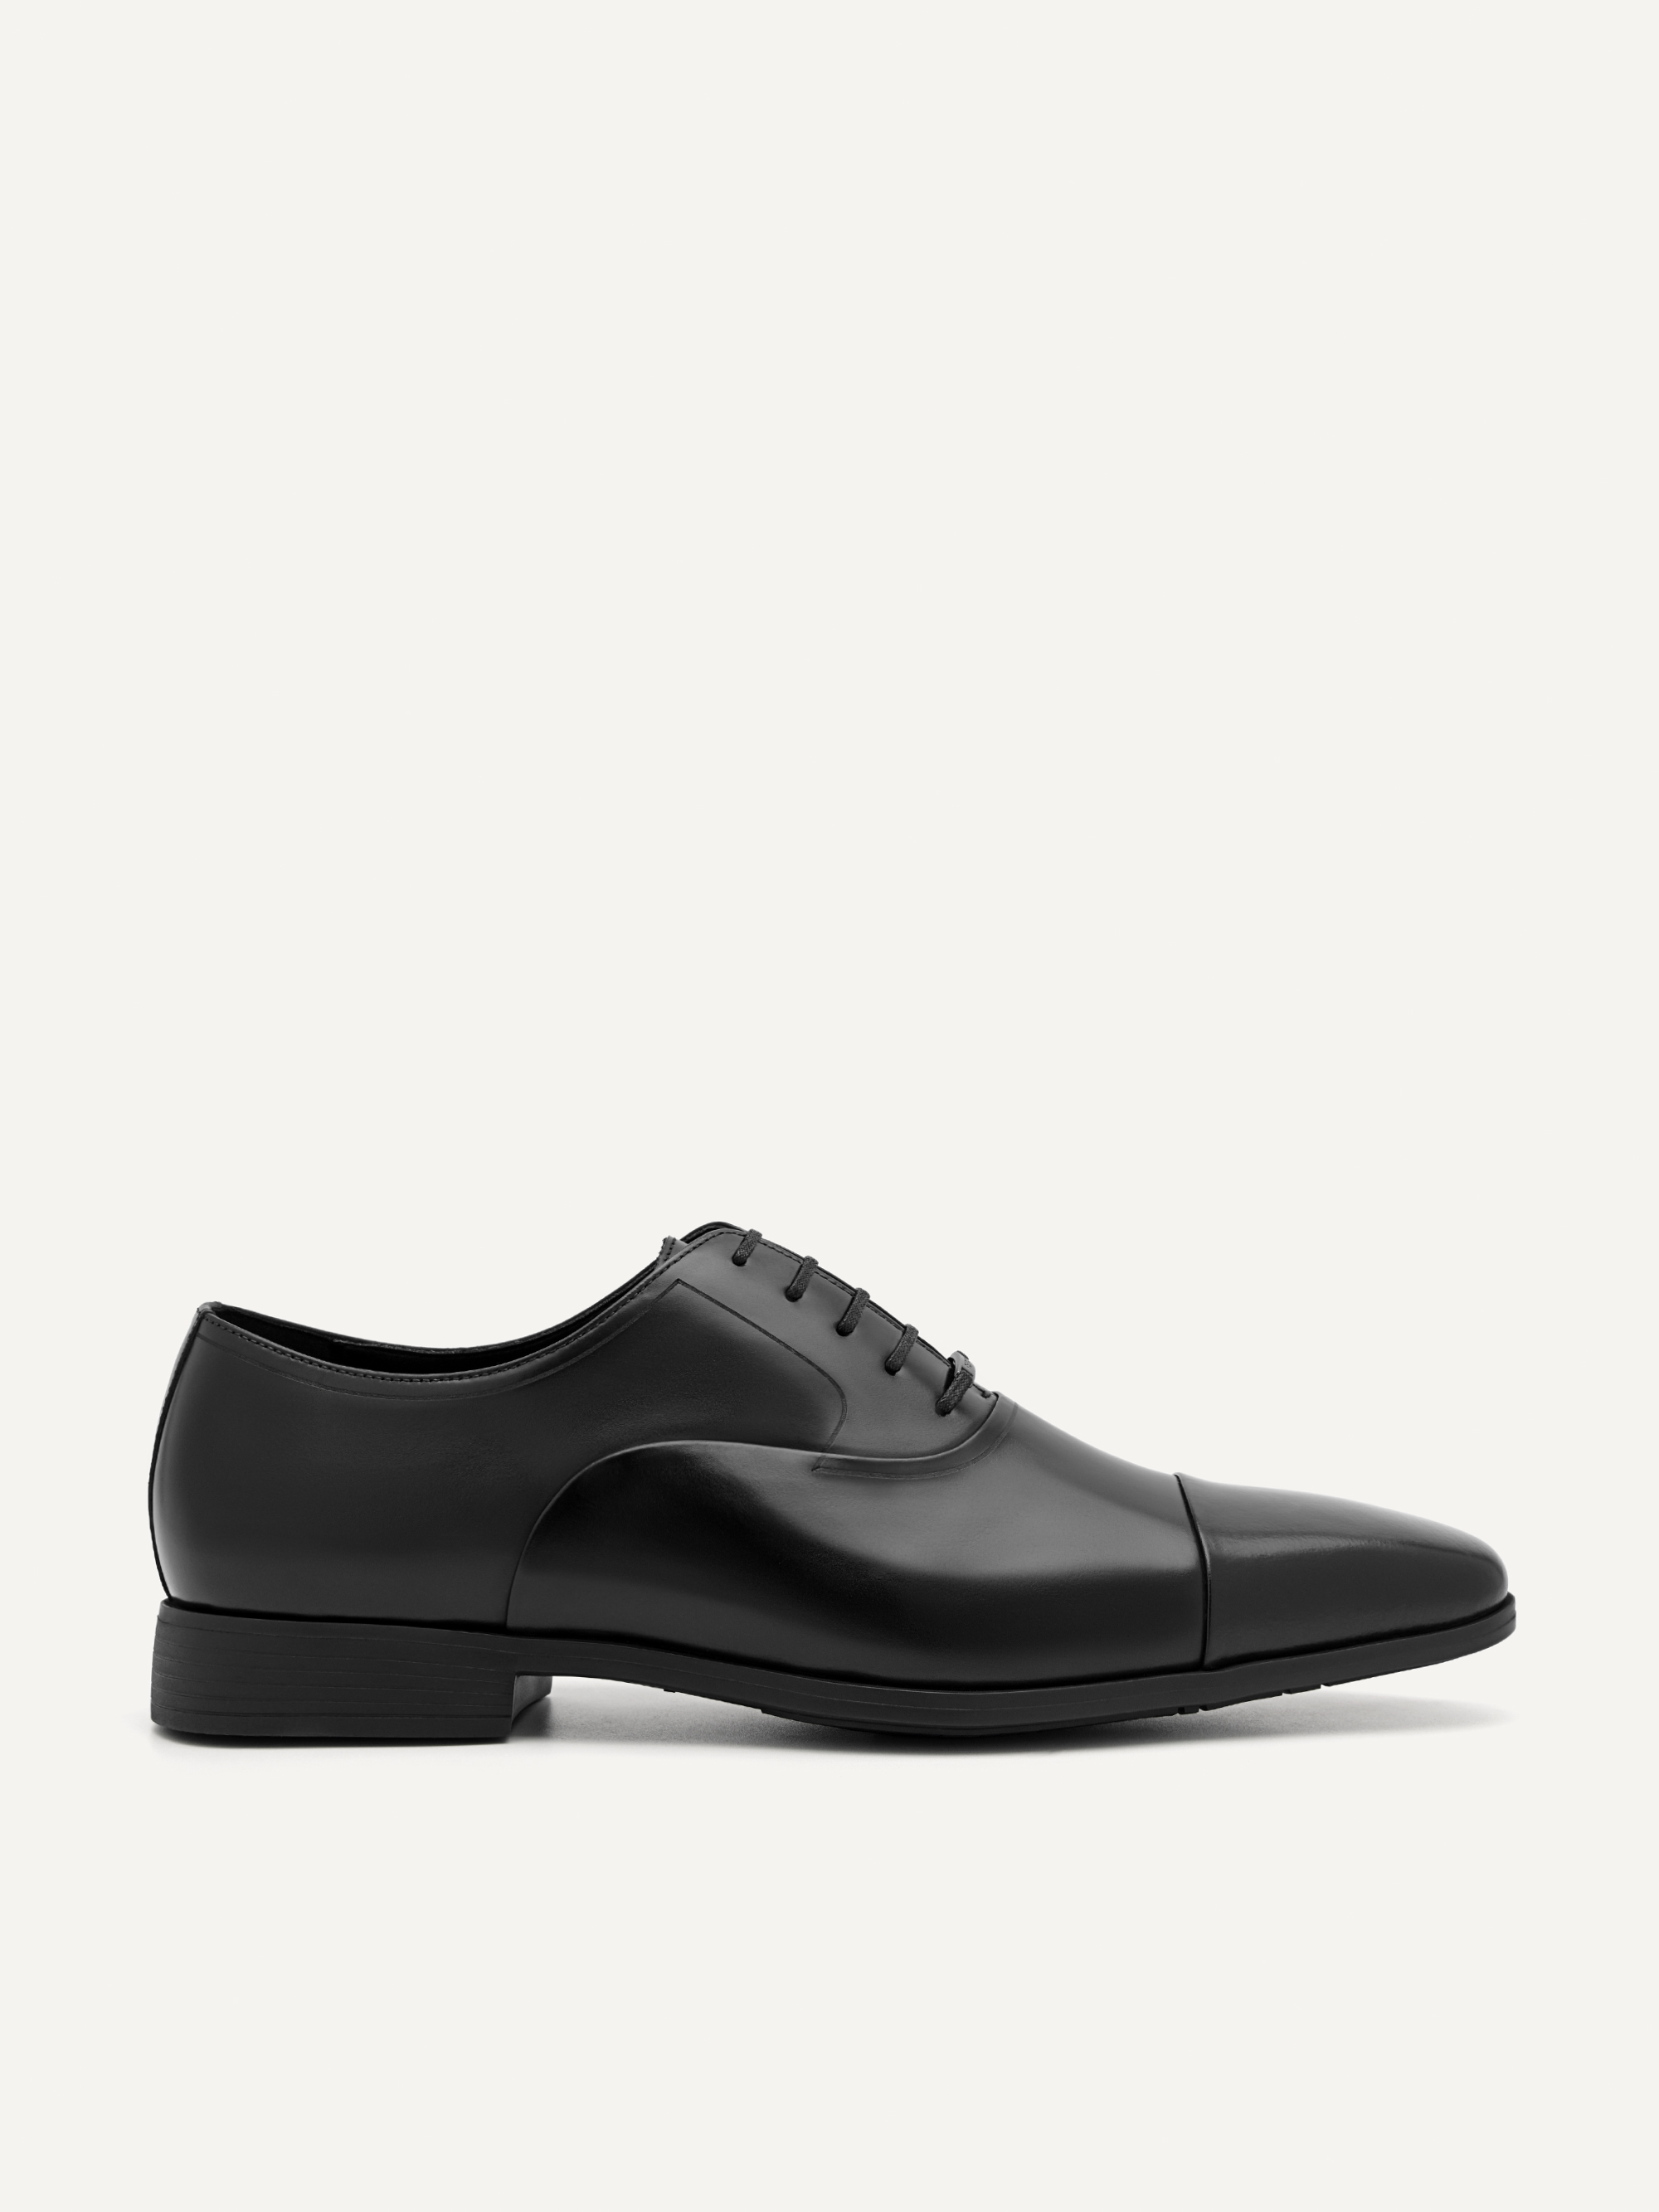 Altitude Lightweight Oxford Shoes - PEDRO MY